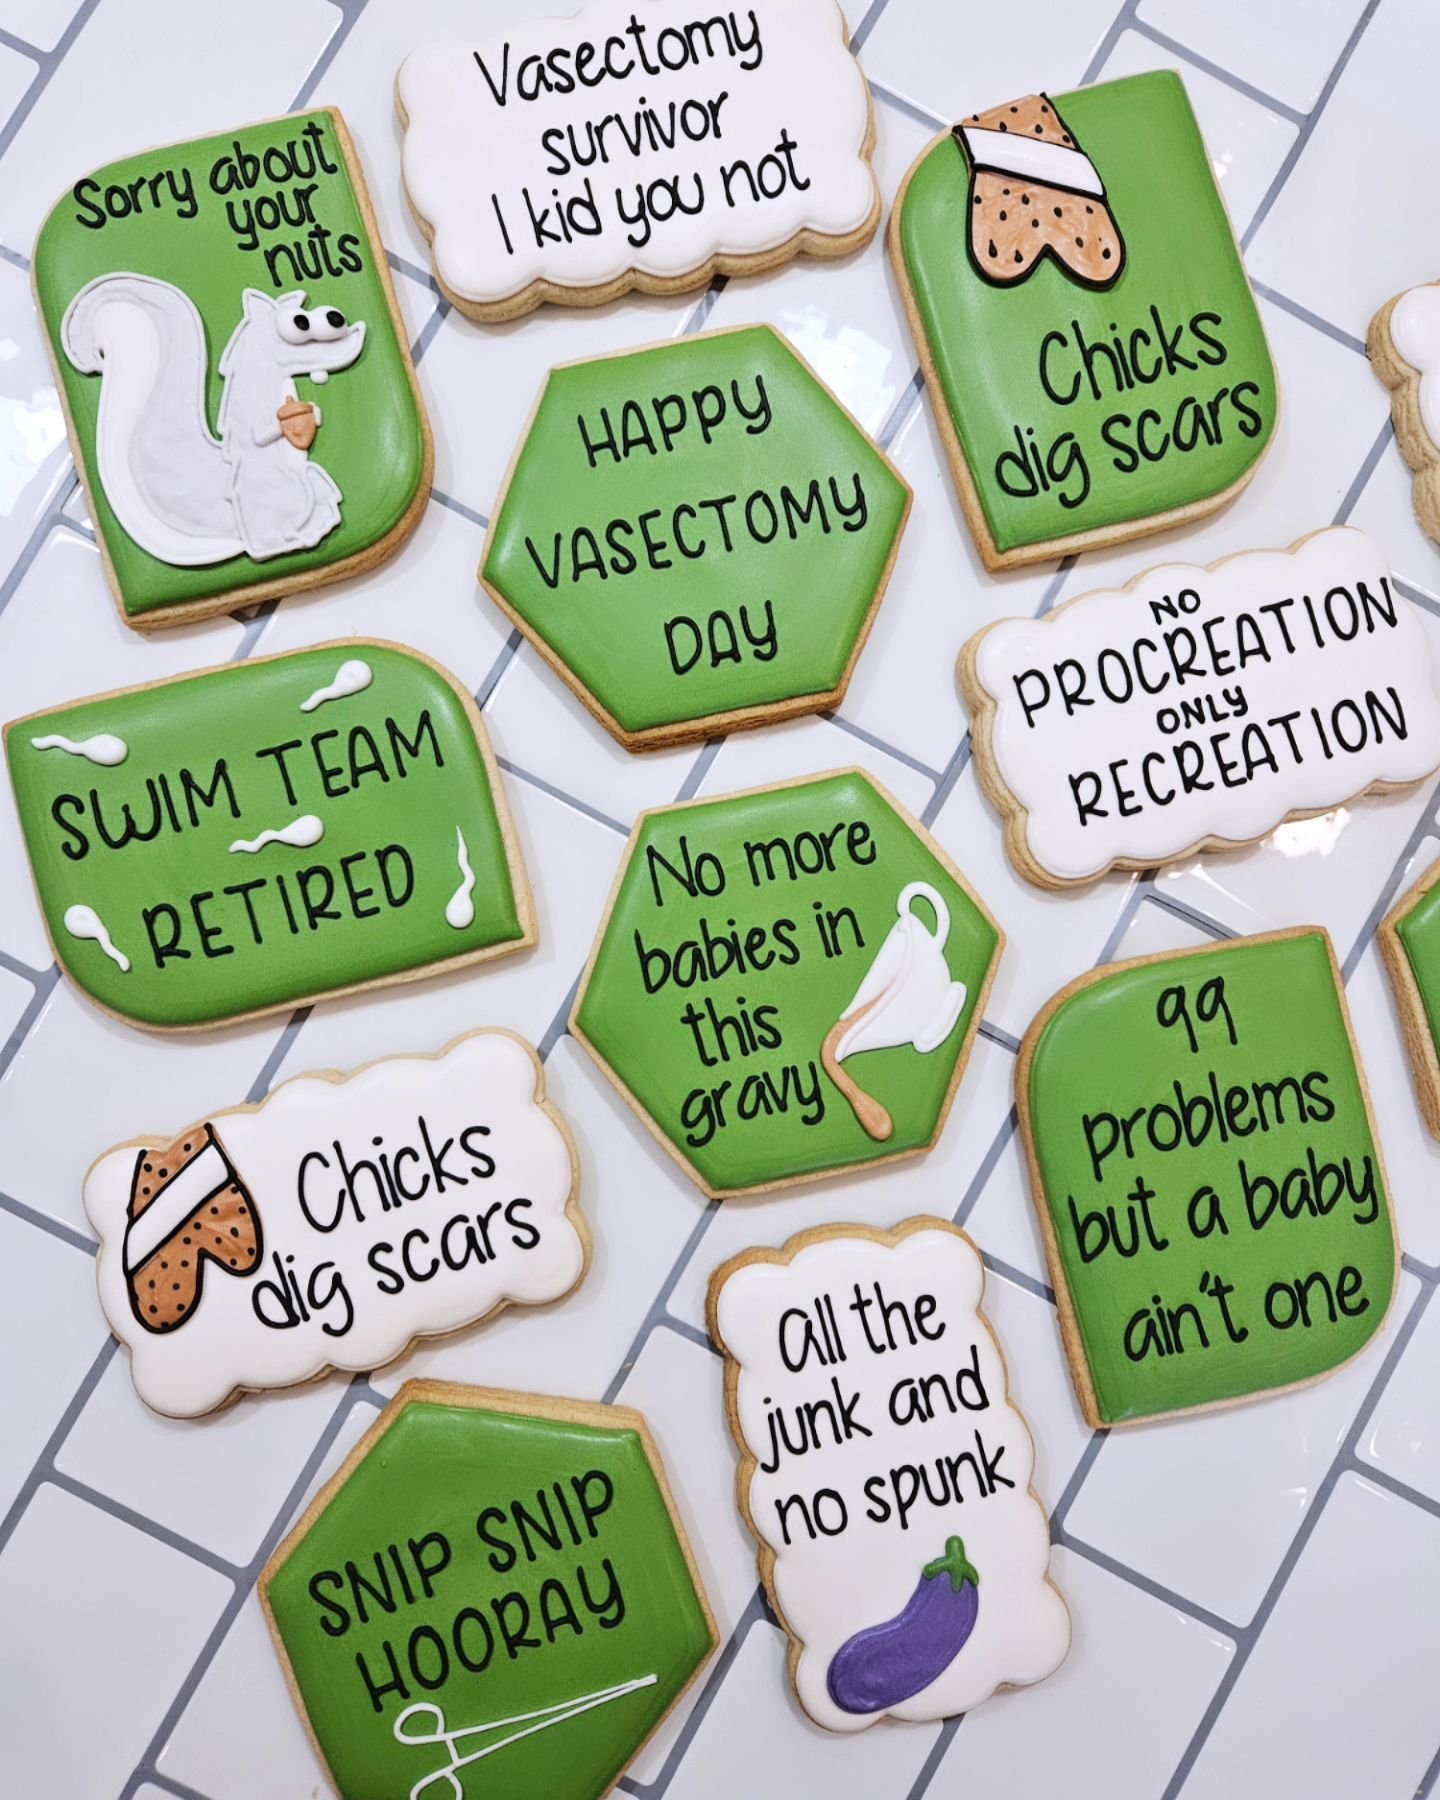 Your reminder that cookies make literally any occasion a bit of a party 😉🥳 
.
.
.
#vasectomy #vasectomycookies #snipsniphooray #sorryaboutyournuts #cookies #cookie #cookieart #cookiesofinstagram #cookiestagram #cookiedecorating #sugarcookiemarketin